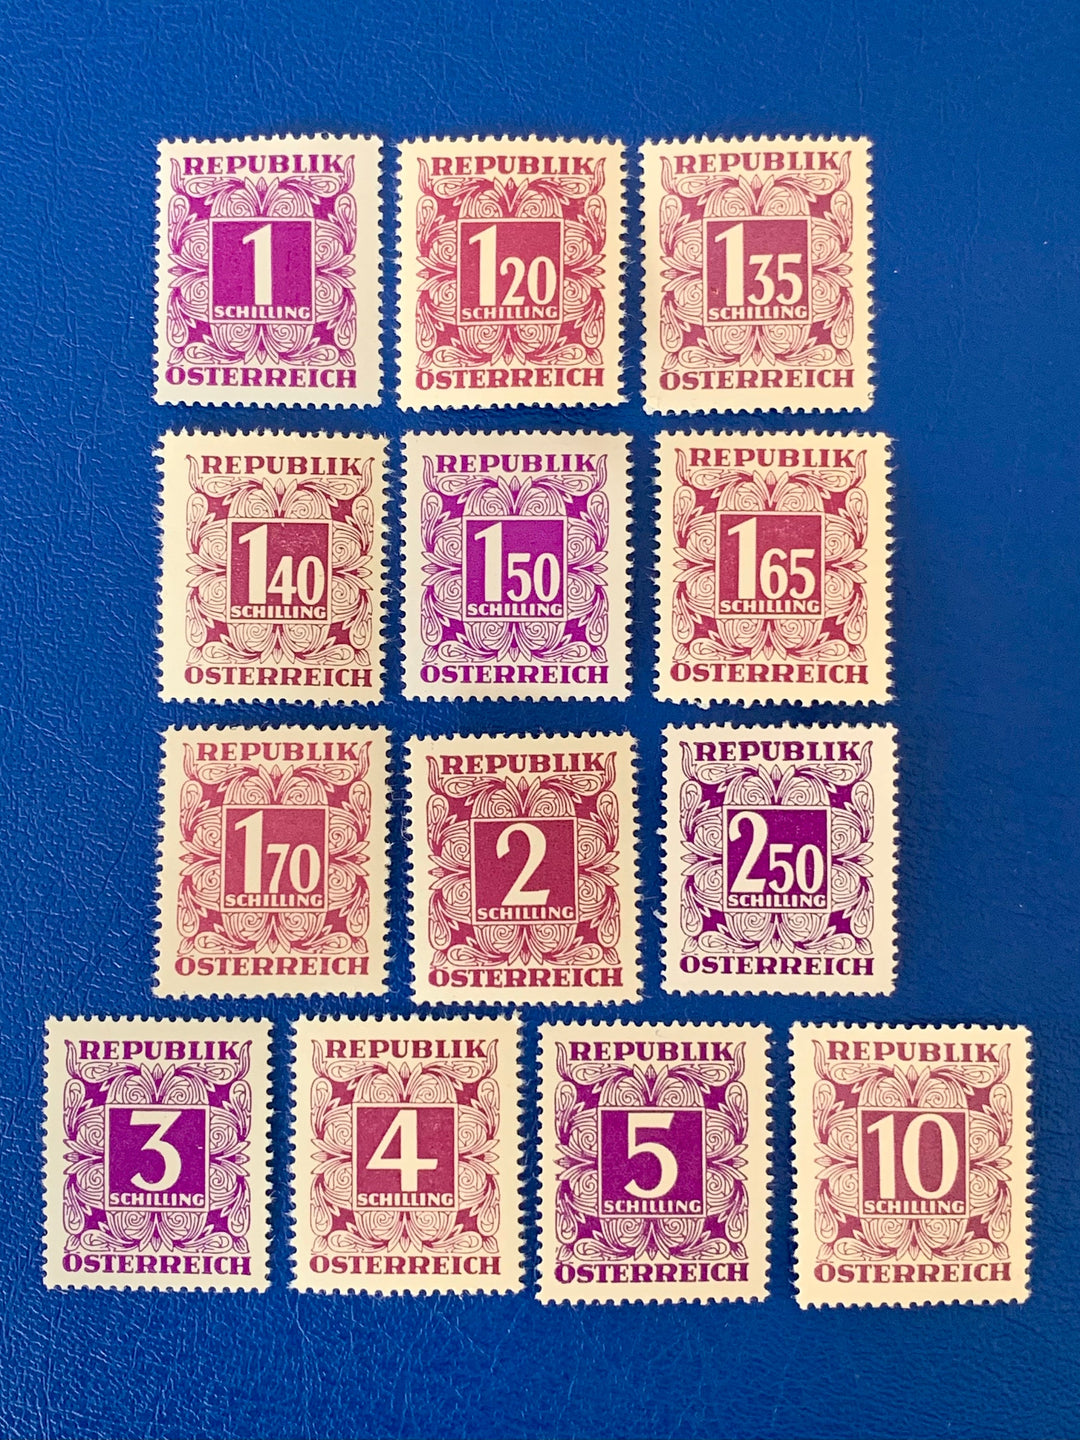 Austria - Original Vintage Postage Stamps - 1949 - Postage Due - for the collector, artist or crafter